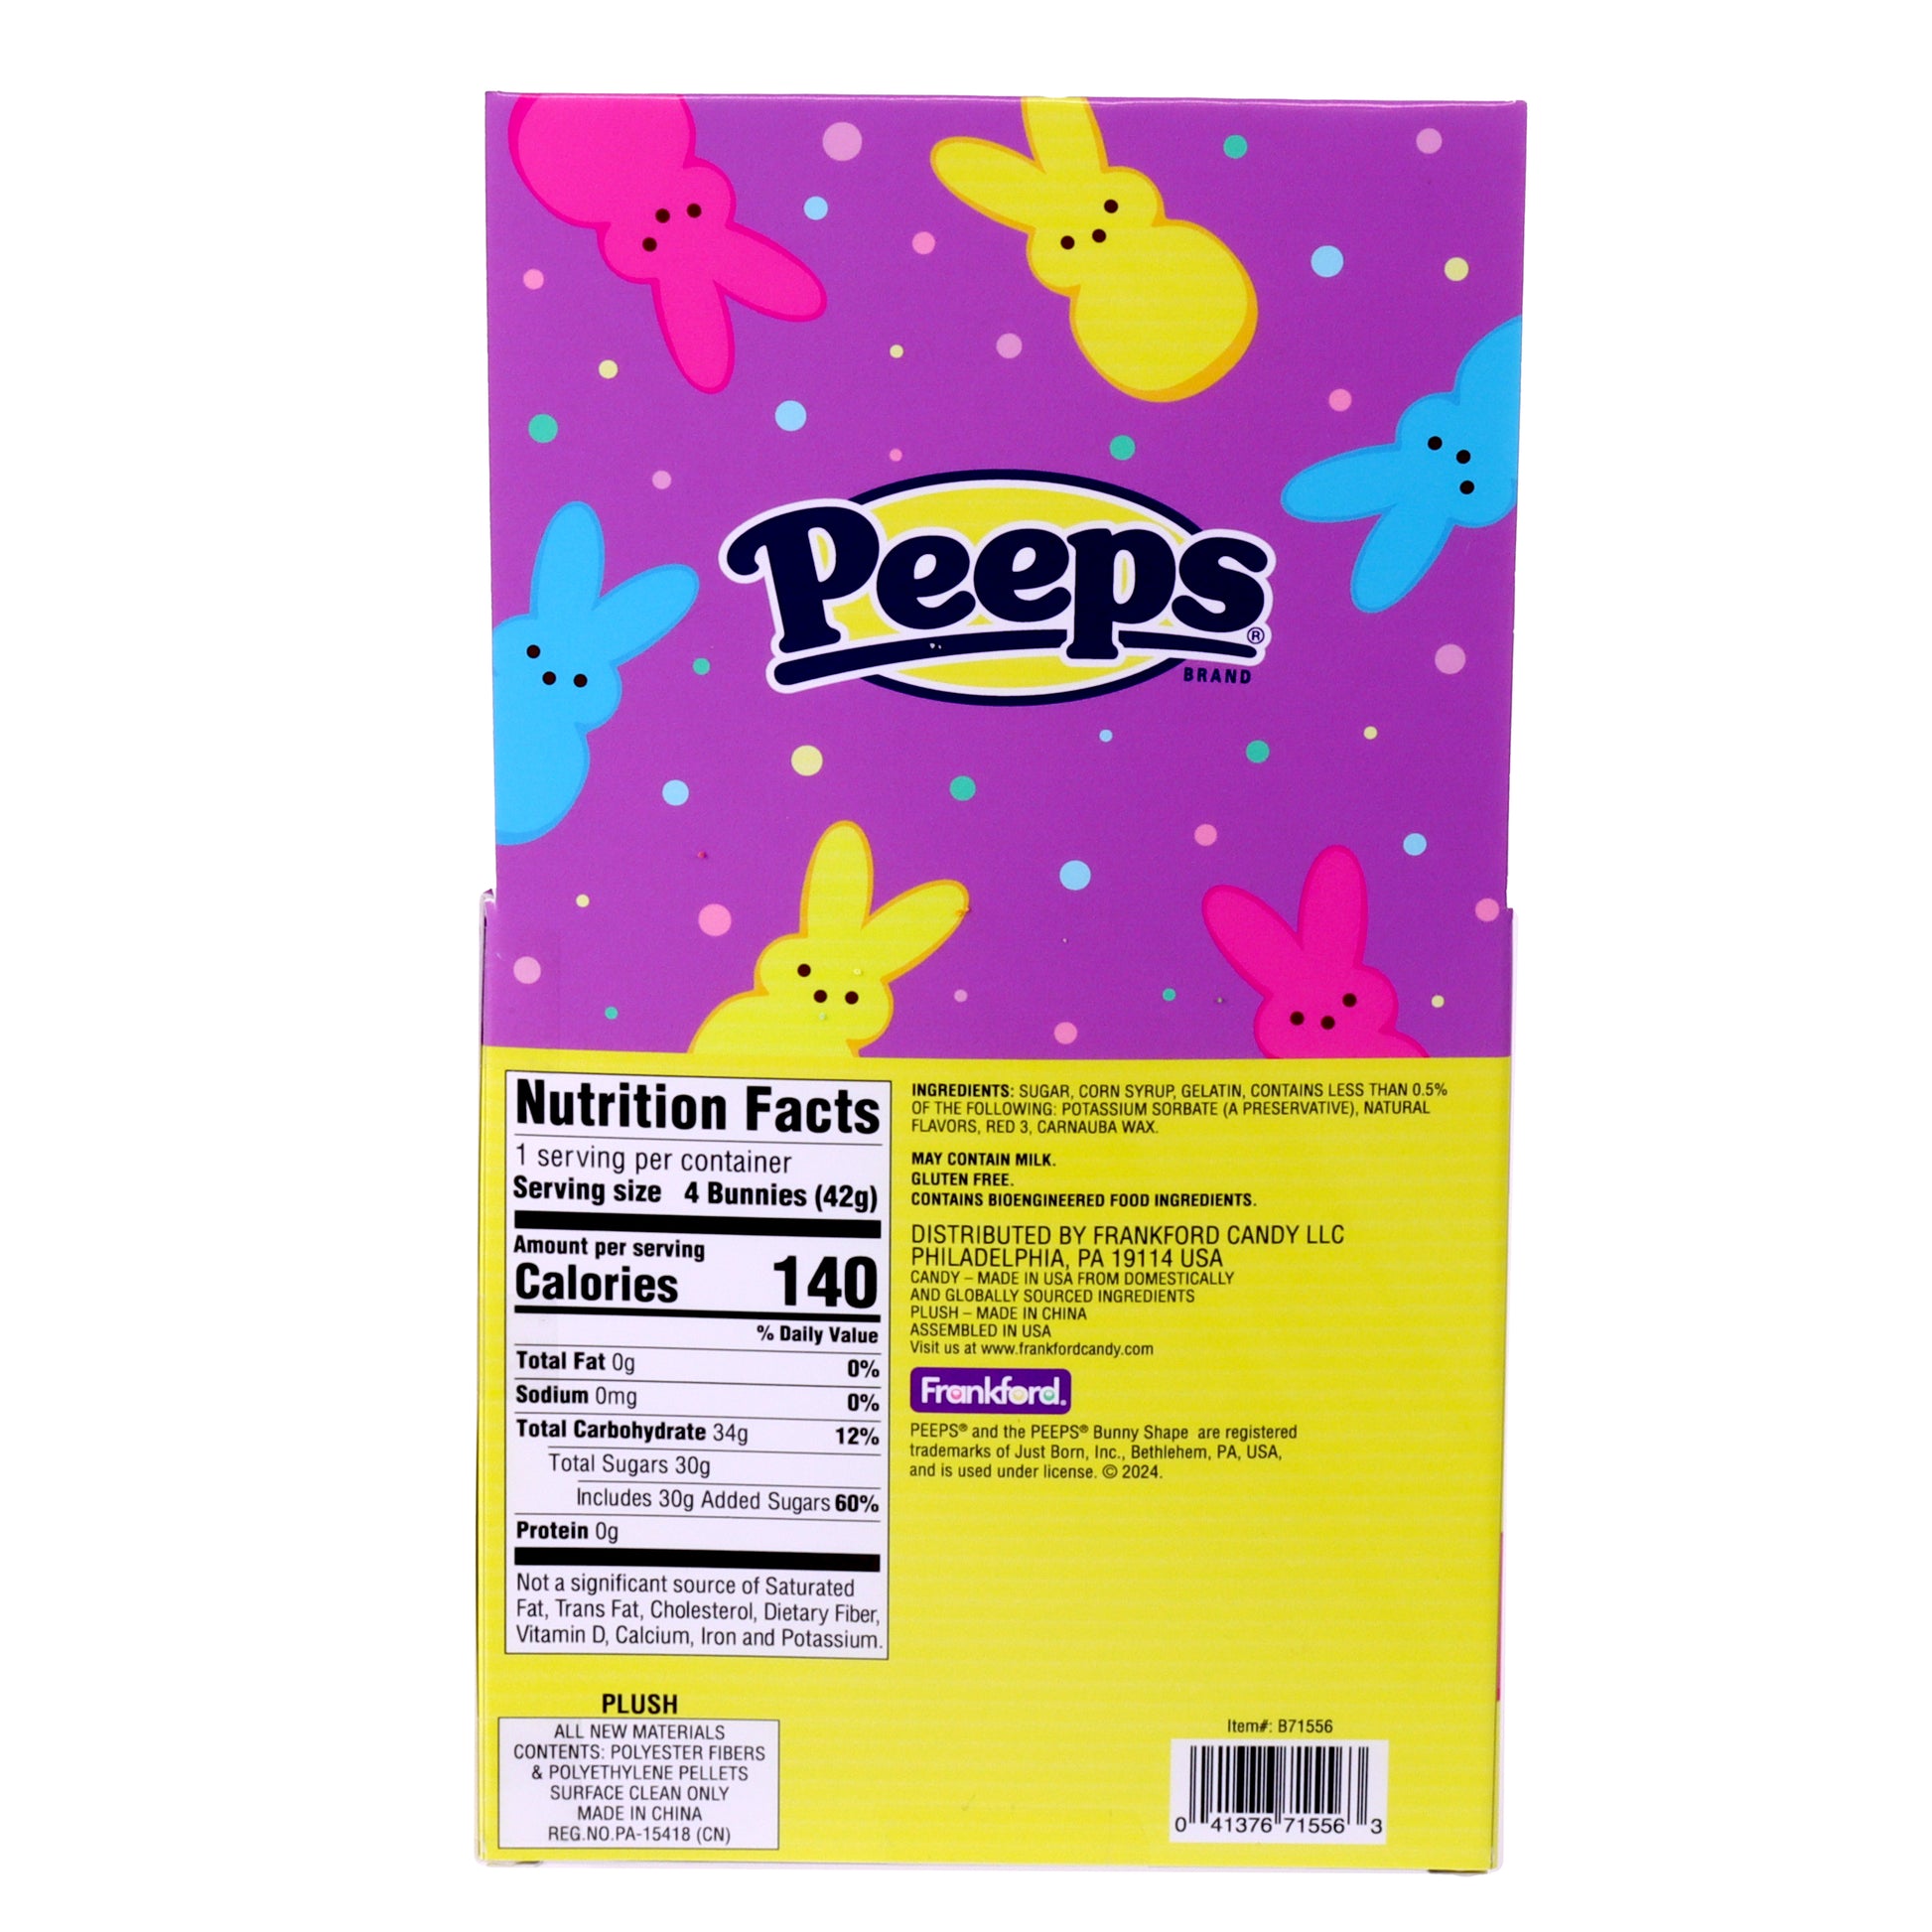 purple and yellow box with nutrition label and ingredients list